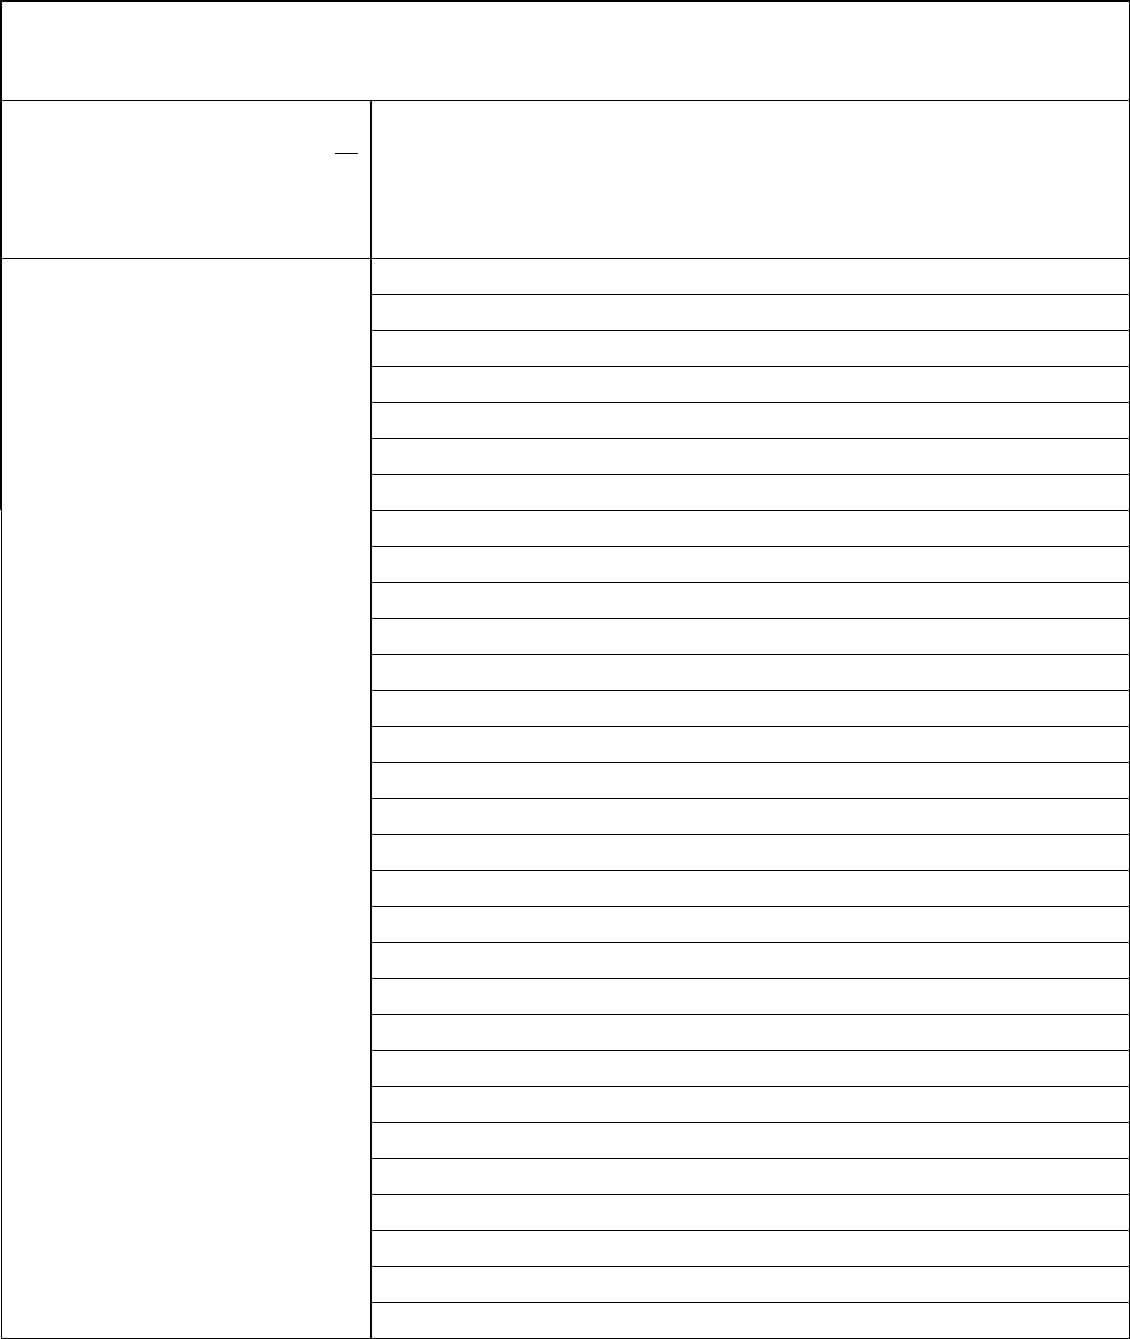 Cornell Notes Template In Word And Pdf Formats With Regard To Cornell Note Template Word